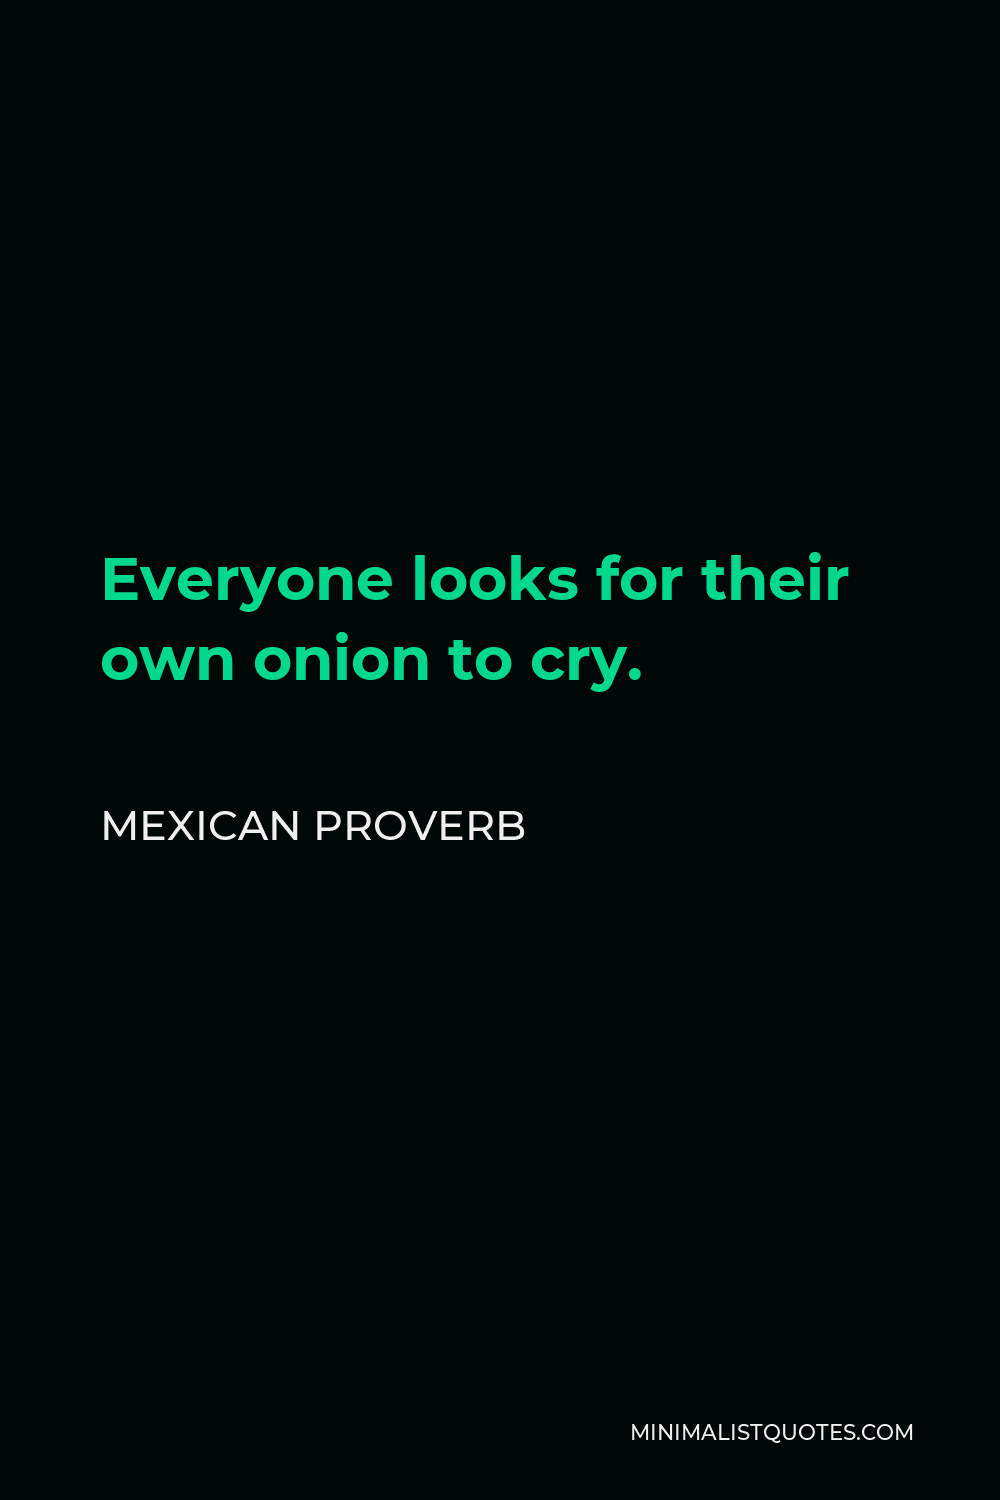 Mexican Proverb Quote - Everyone looks for their own onion to cry.